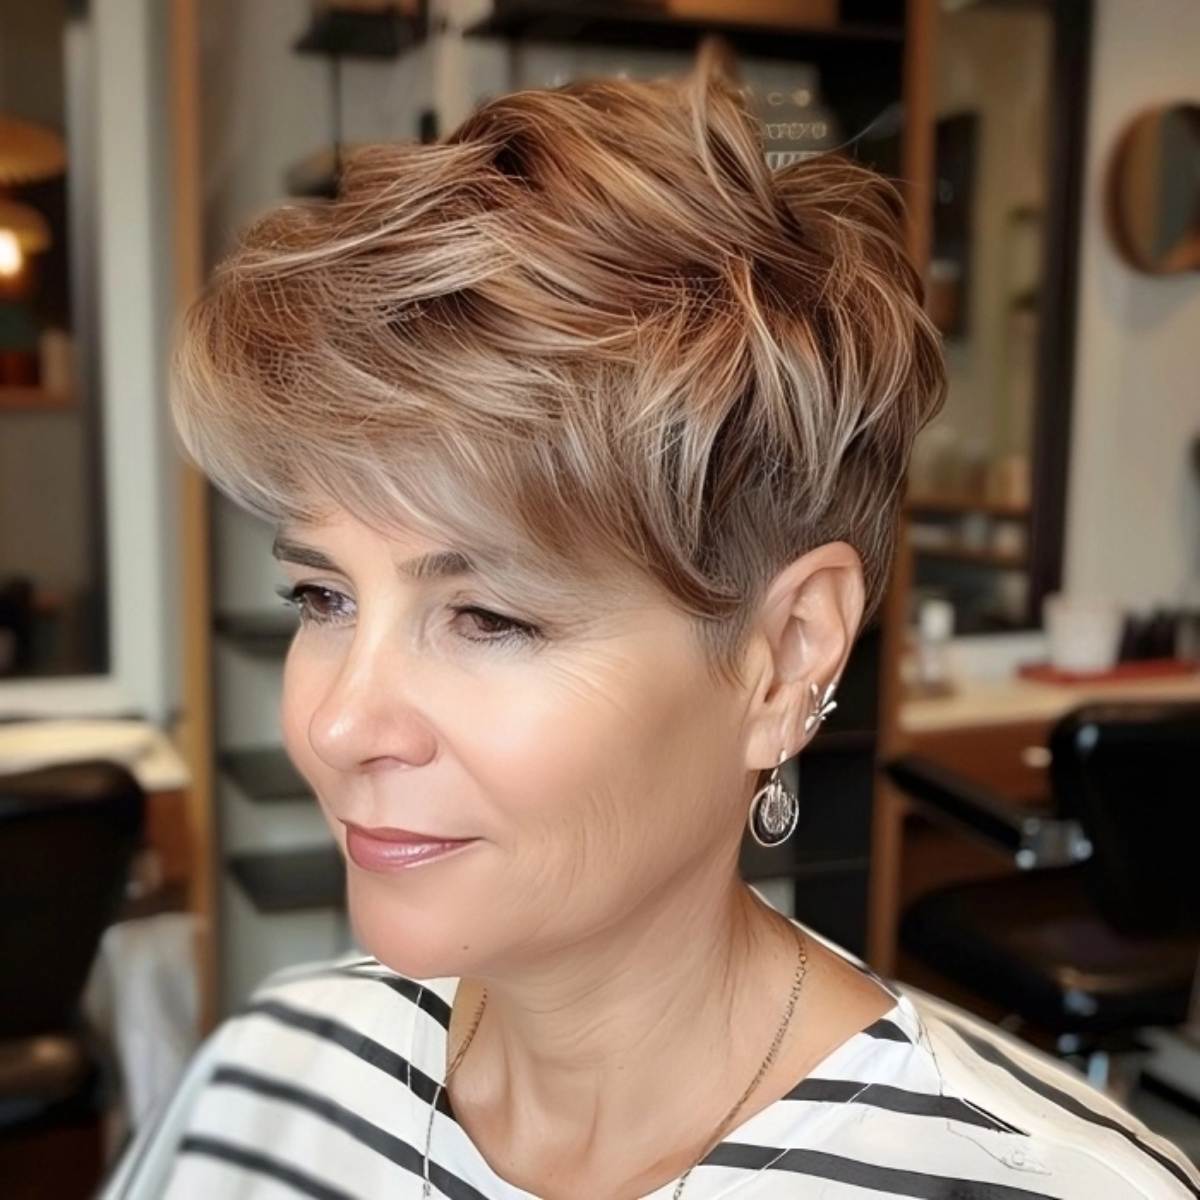 Trendy Pixie hairstyle for Older Women